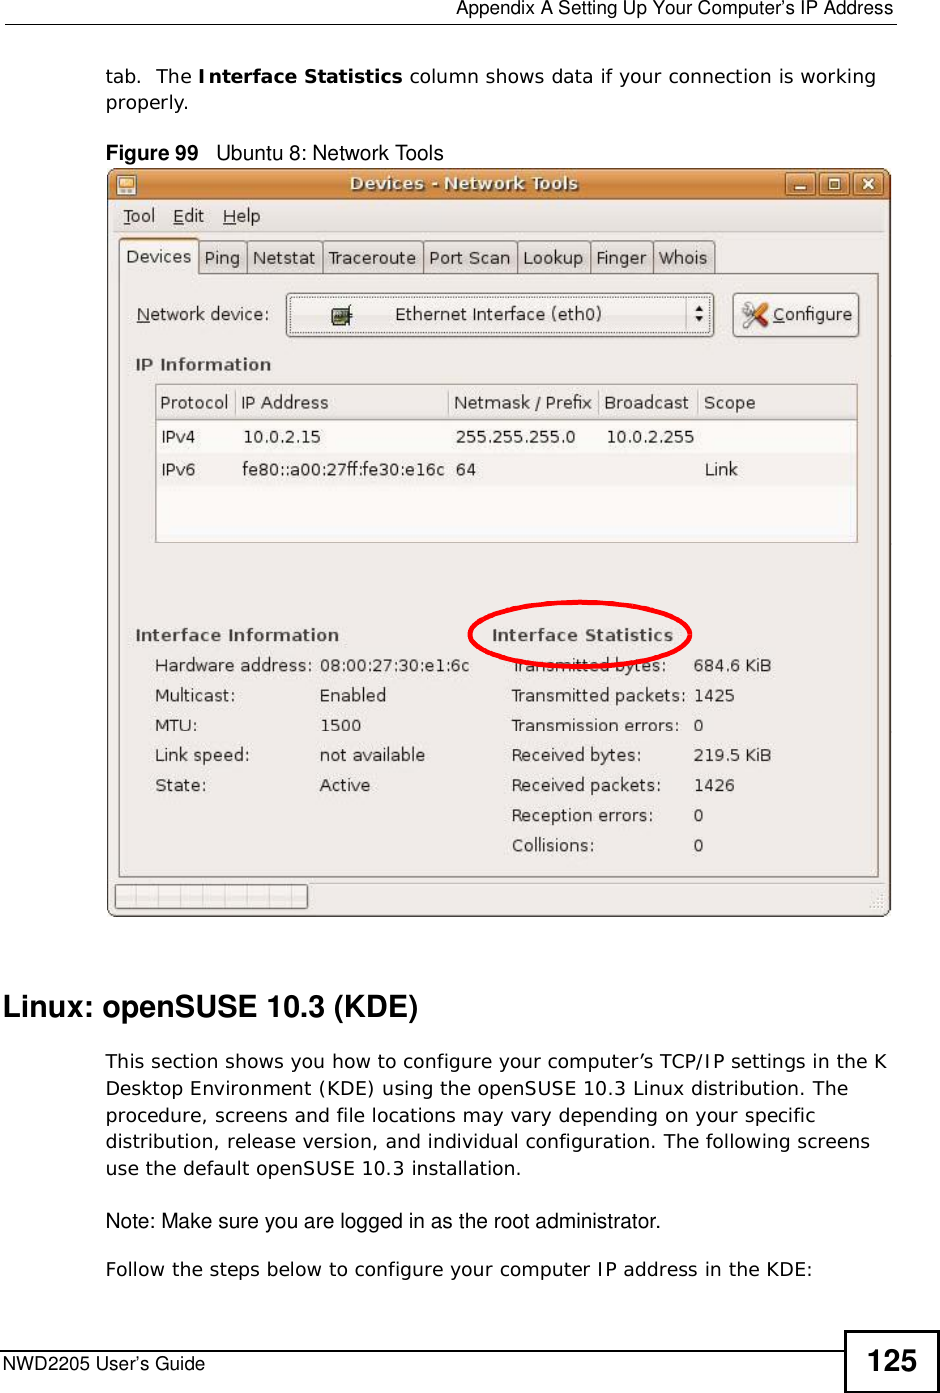  Appendix ASetting Up Your Computer’s IP AddressNWD2205 User’s Guide 125tab.  The Interface Statistics column shows data if your connection is working properly.Figure 99   Ubuntu 8: Network ToolsLinux: openSUSE 10.3 (KDE)This section shows you how to configure your computer’s TCP/IP settings in the K Desktop Environment (KDE) using the openSUSE 10.3 Linux distribution. The procedure, screens and file locations may vary depending on your specific distribution, release version, and individual configuration. The following screens use the default openSUSE 10.3 installation.Note: Make sure you are logged in as the root administrator. Follow the steps below to configure your computer IP address in the KDE: